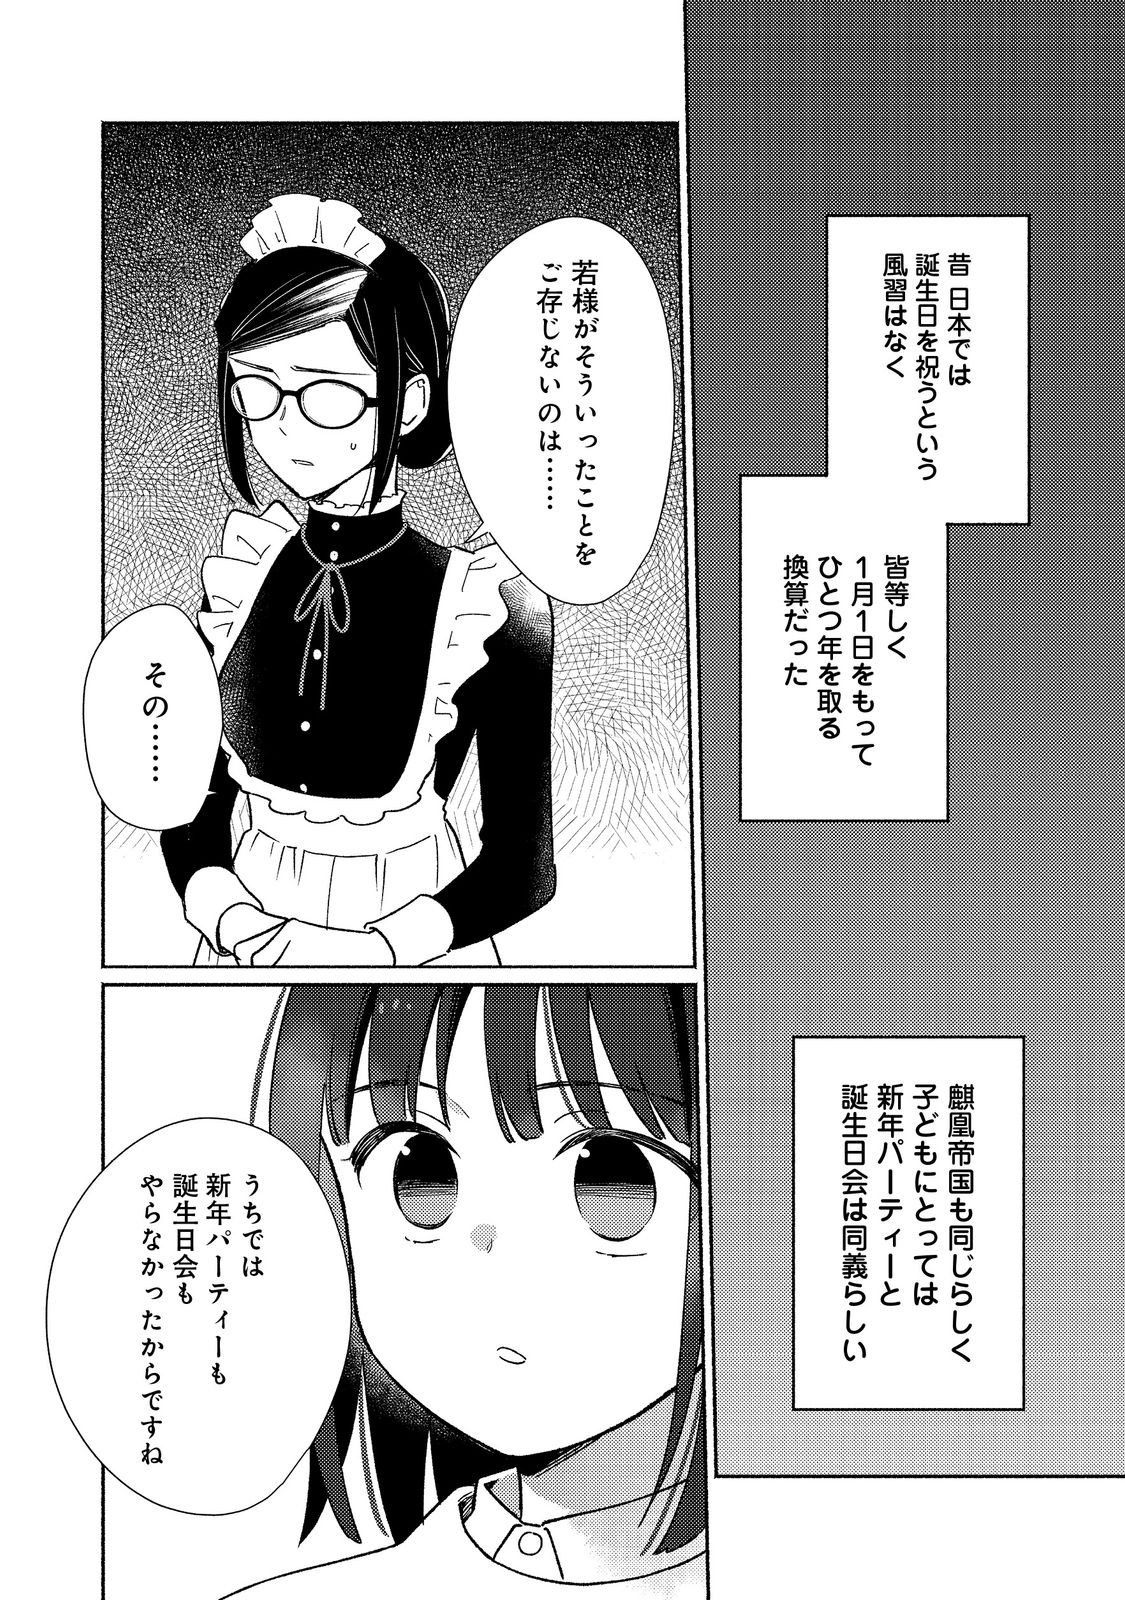 I’m the White Pig Nobleman 第24.1話 - Page 2